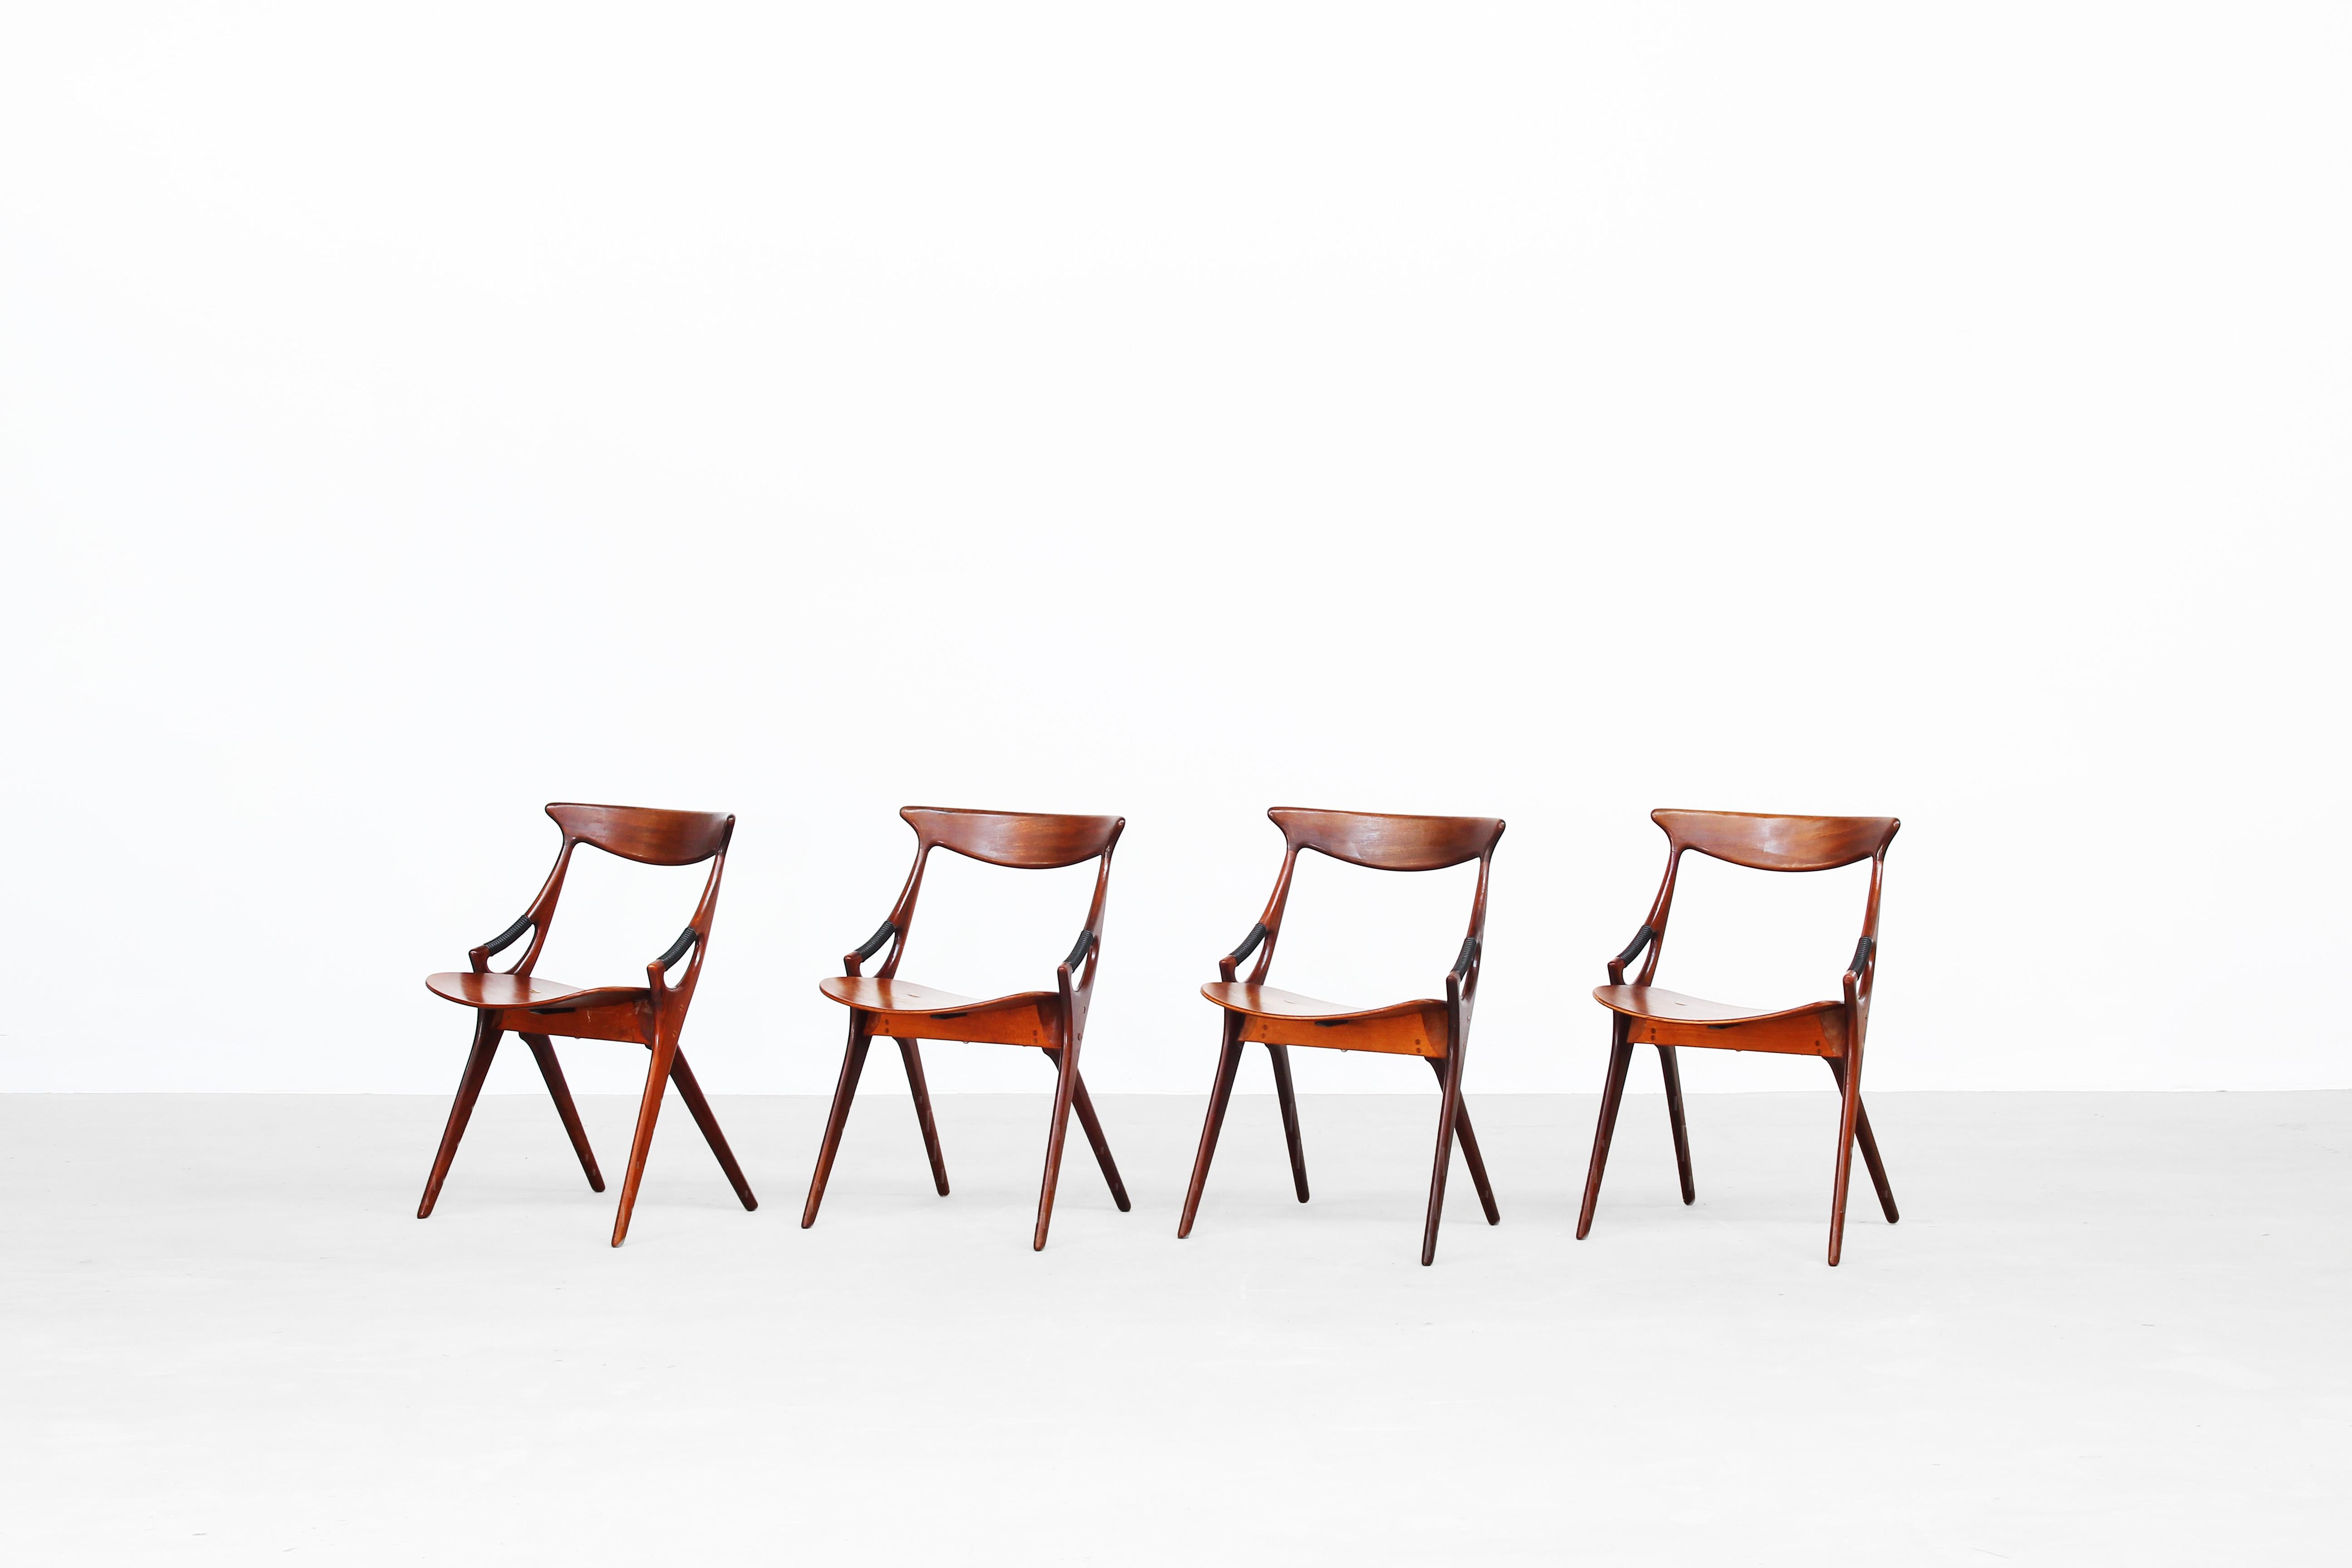 Set of four dining chairs designed by Arne Hovmand-Olsen and produced by Mogens Kold, Denmark 1959.

This rare model by Mogens Kold is a harmonic symbiosis of sculptural form and function. All four chairs were professionally restored and are in a